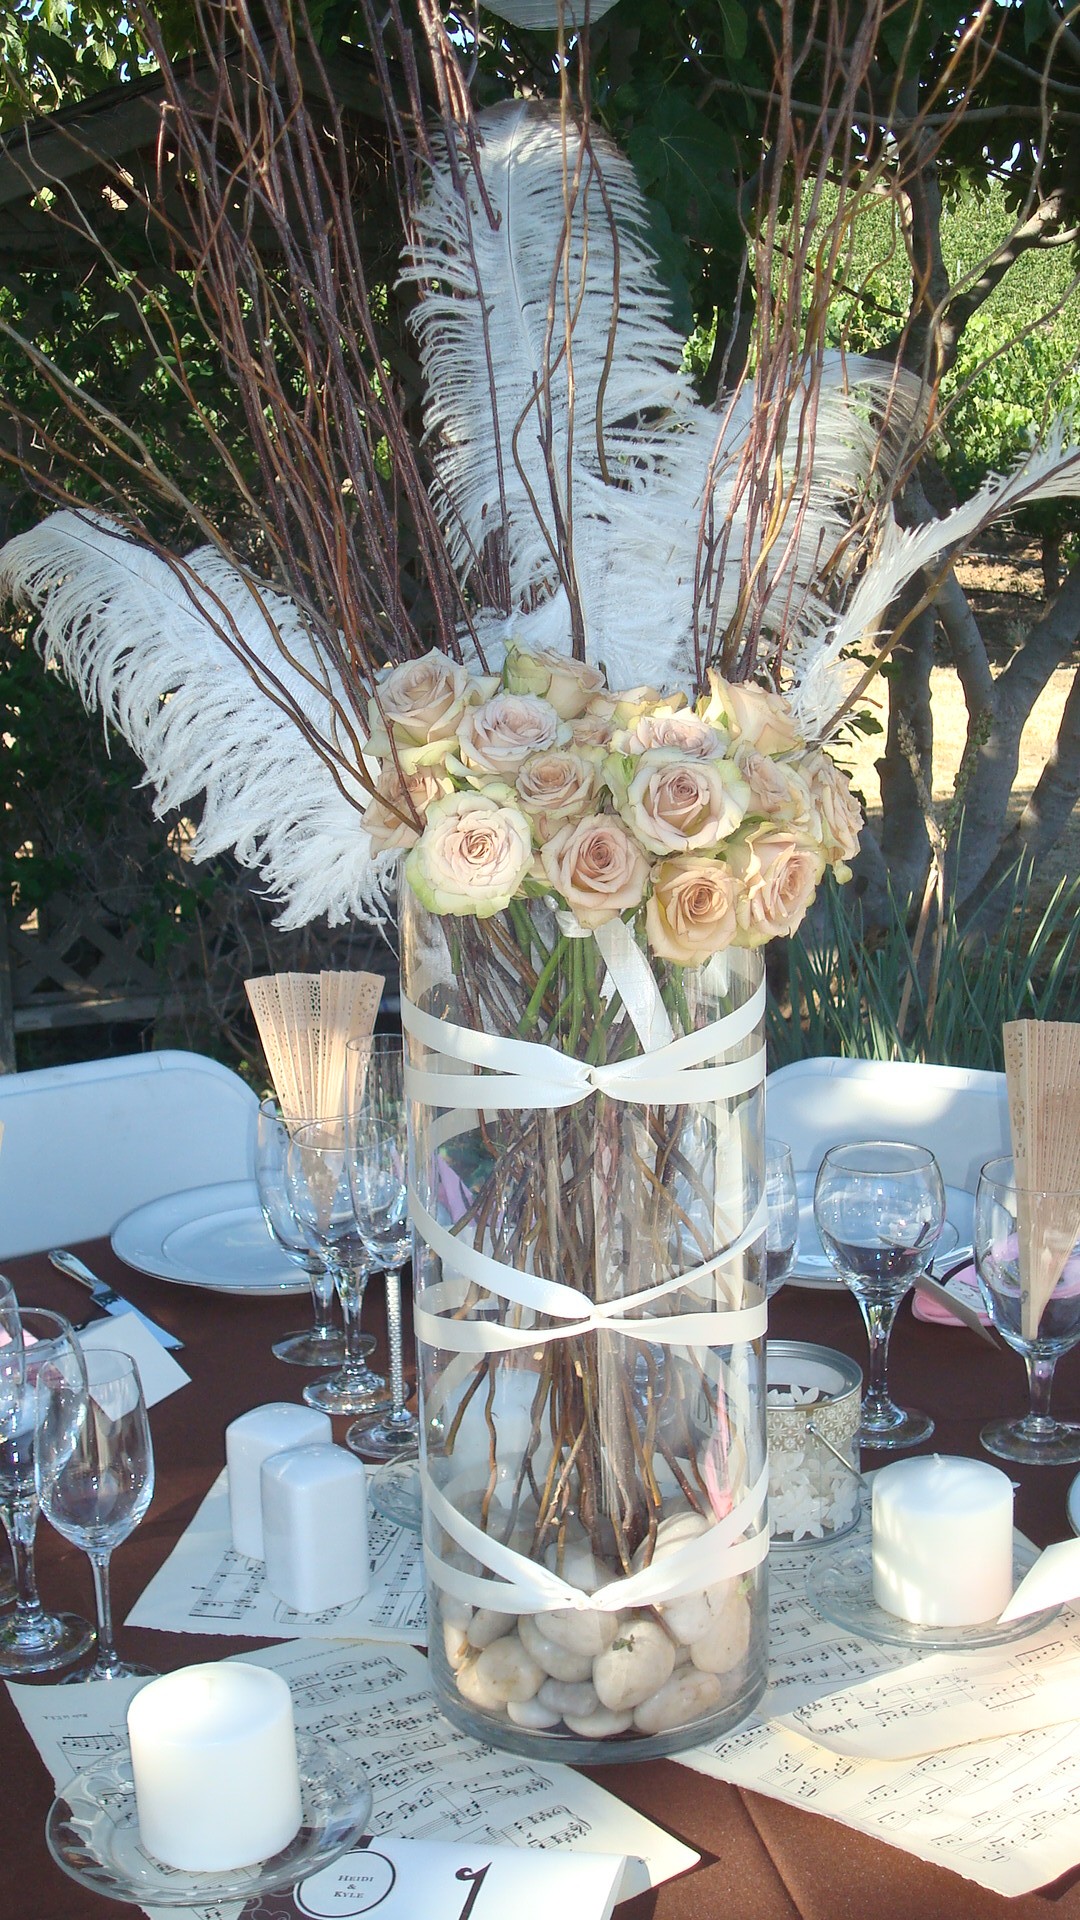 Close-up of the table decor, all keeping with the vintage-theme